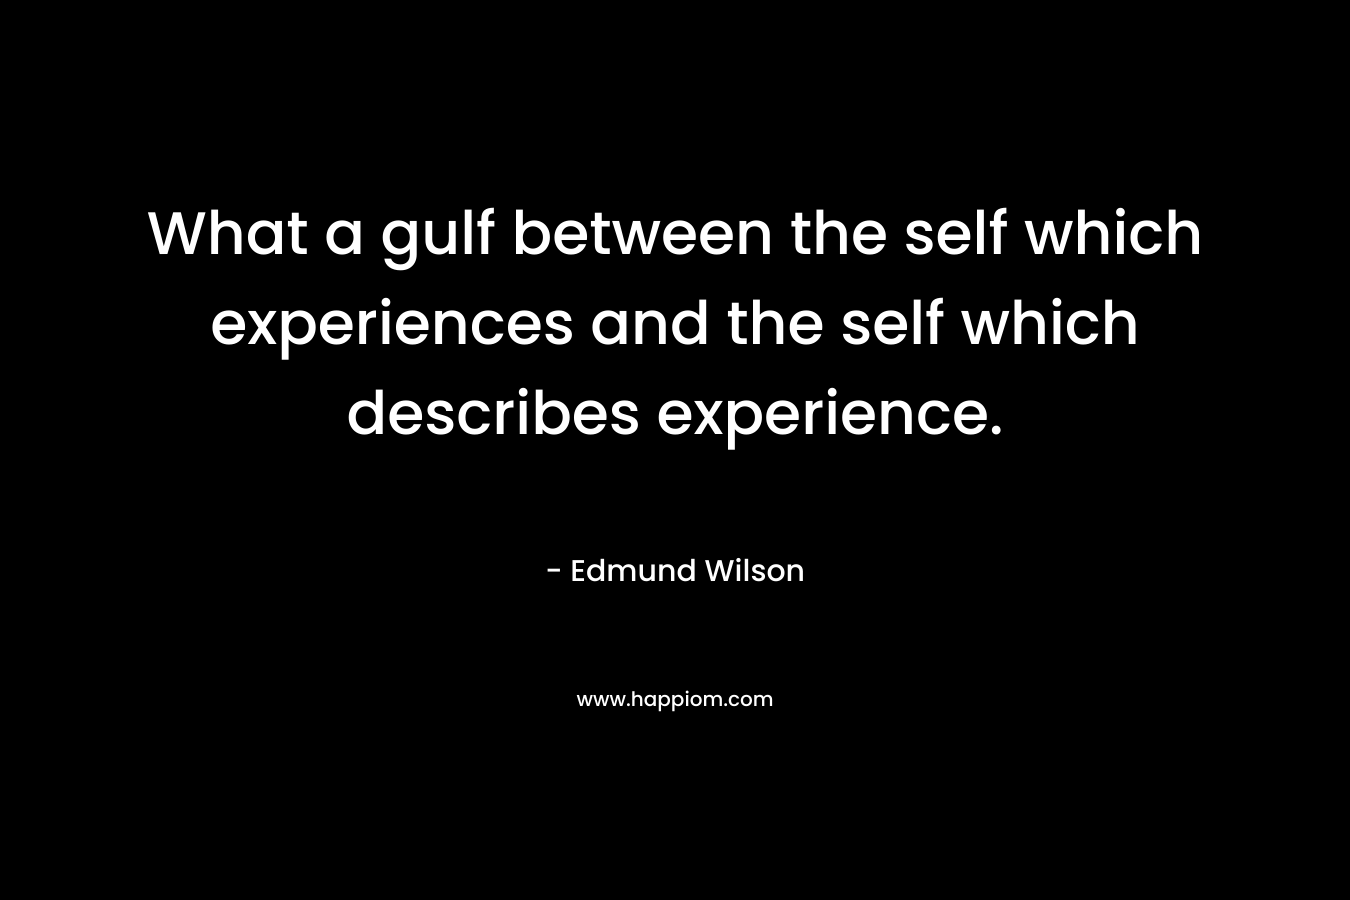 What a gulf between the self which experiences and the self which describes experience. – Edmund Wilson